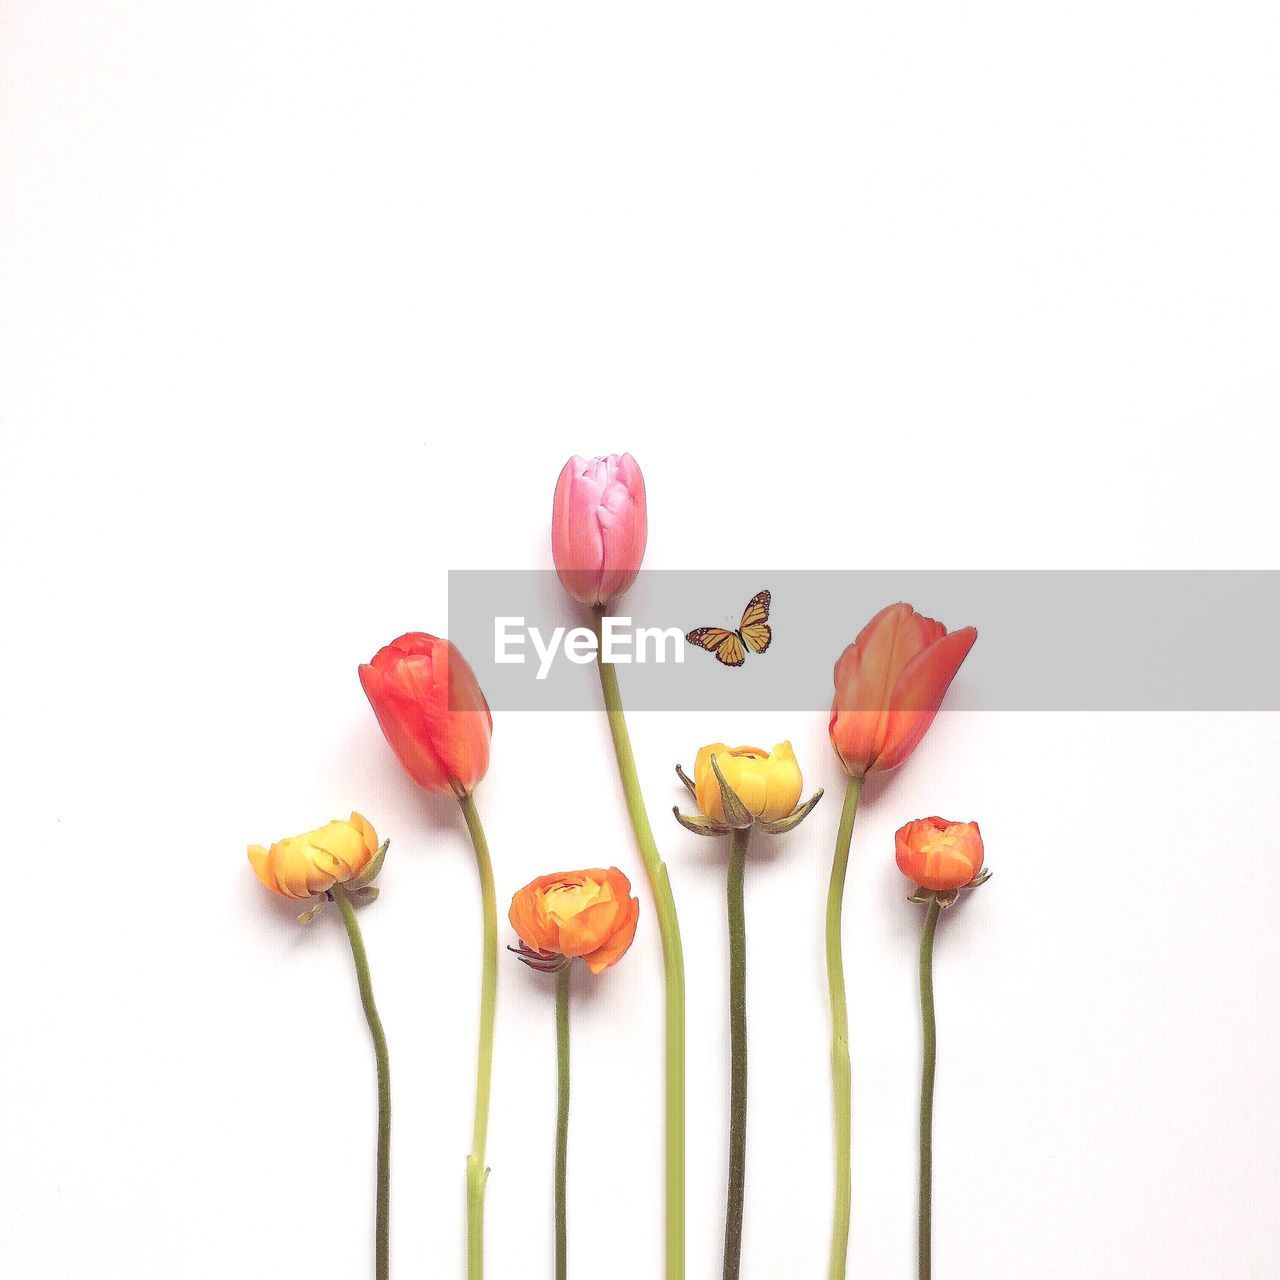 CLOSE-UP OF RED CHILI PEPPERS AGAINST WHITE BACKGROUND